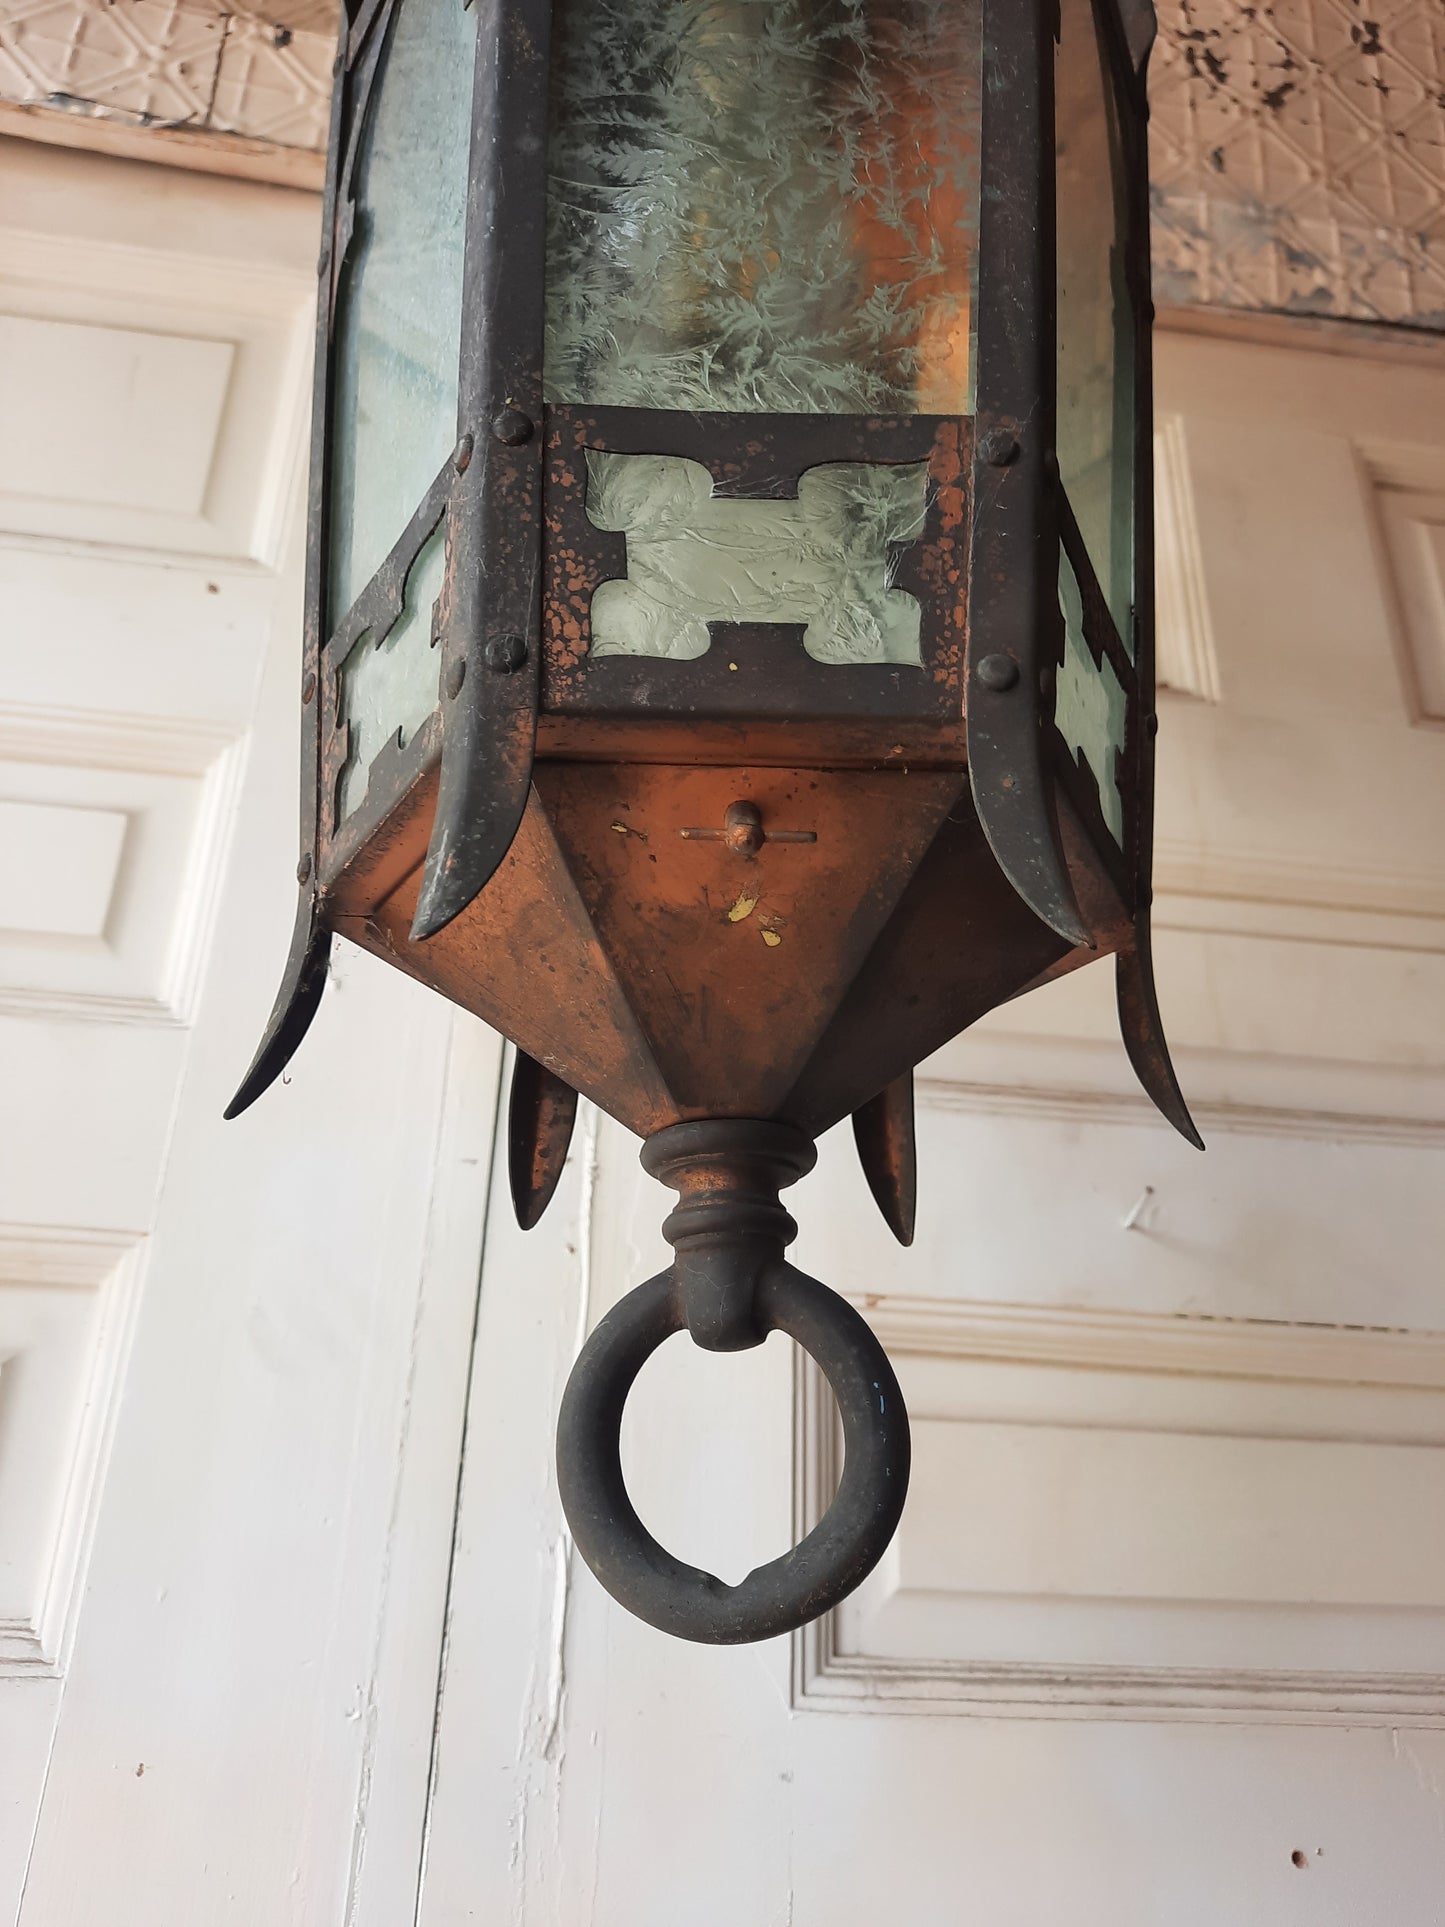 Large Solid Bronze Gothic or Tudor Style Lantern, Vintage Porch Lantern with Textured Glass